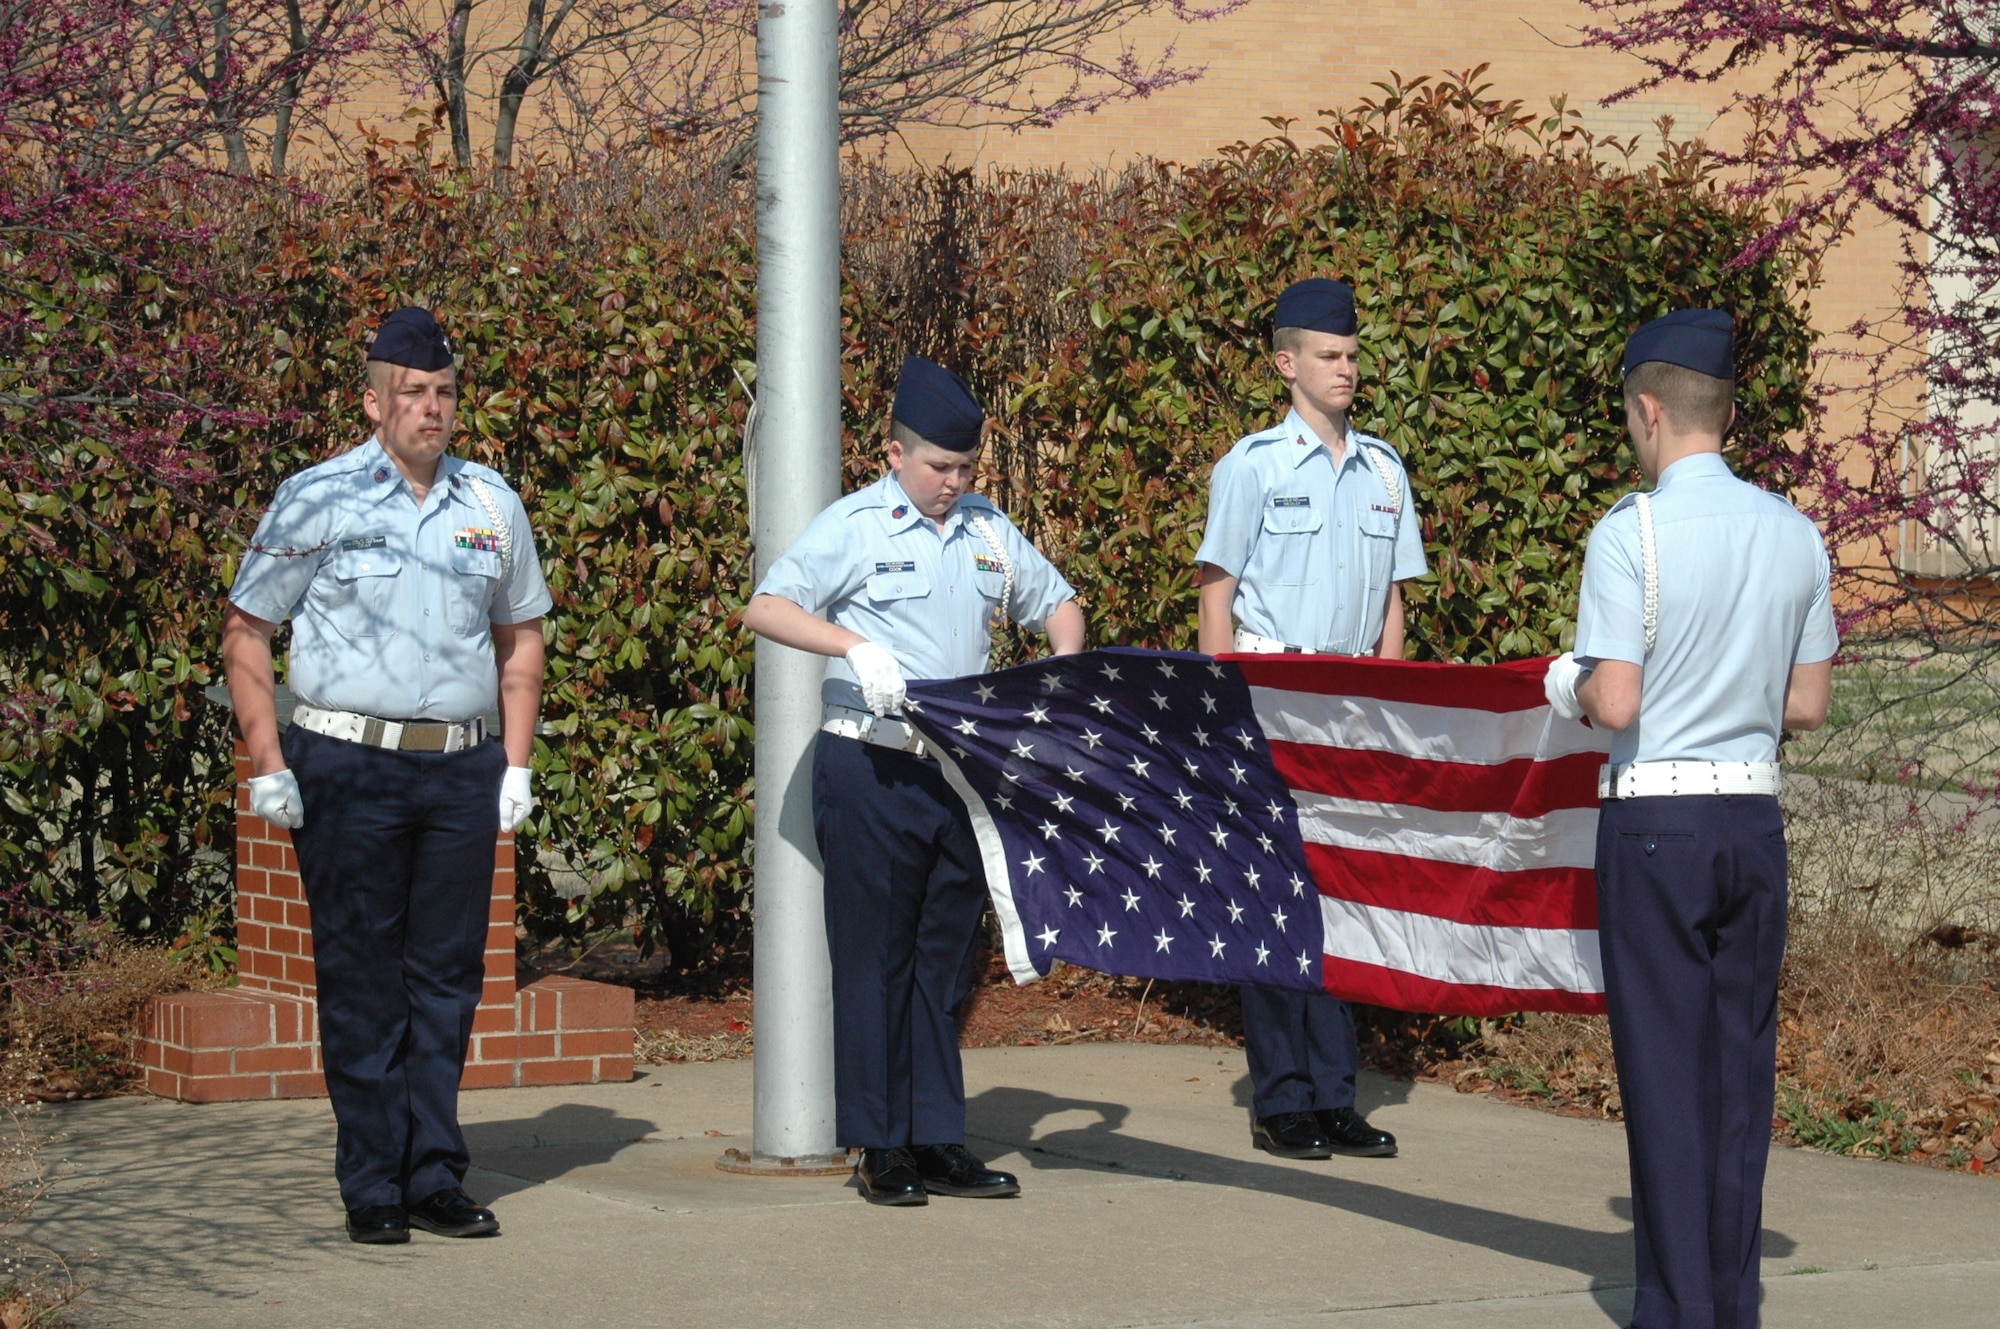 The Grove Composite Squadron team members, from left, Cadets Chief Master Sgt. Benjamin Goodman, Senior Master Sgts. Dakota Gray and Marshall Cook and Senior Airman Justus Taylor demonstrate their ability to lower and fold American flag for this part of the competition. (Air Force photo by Kathy Paine)